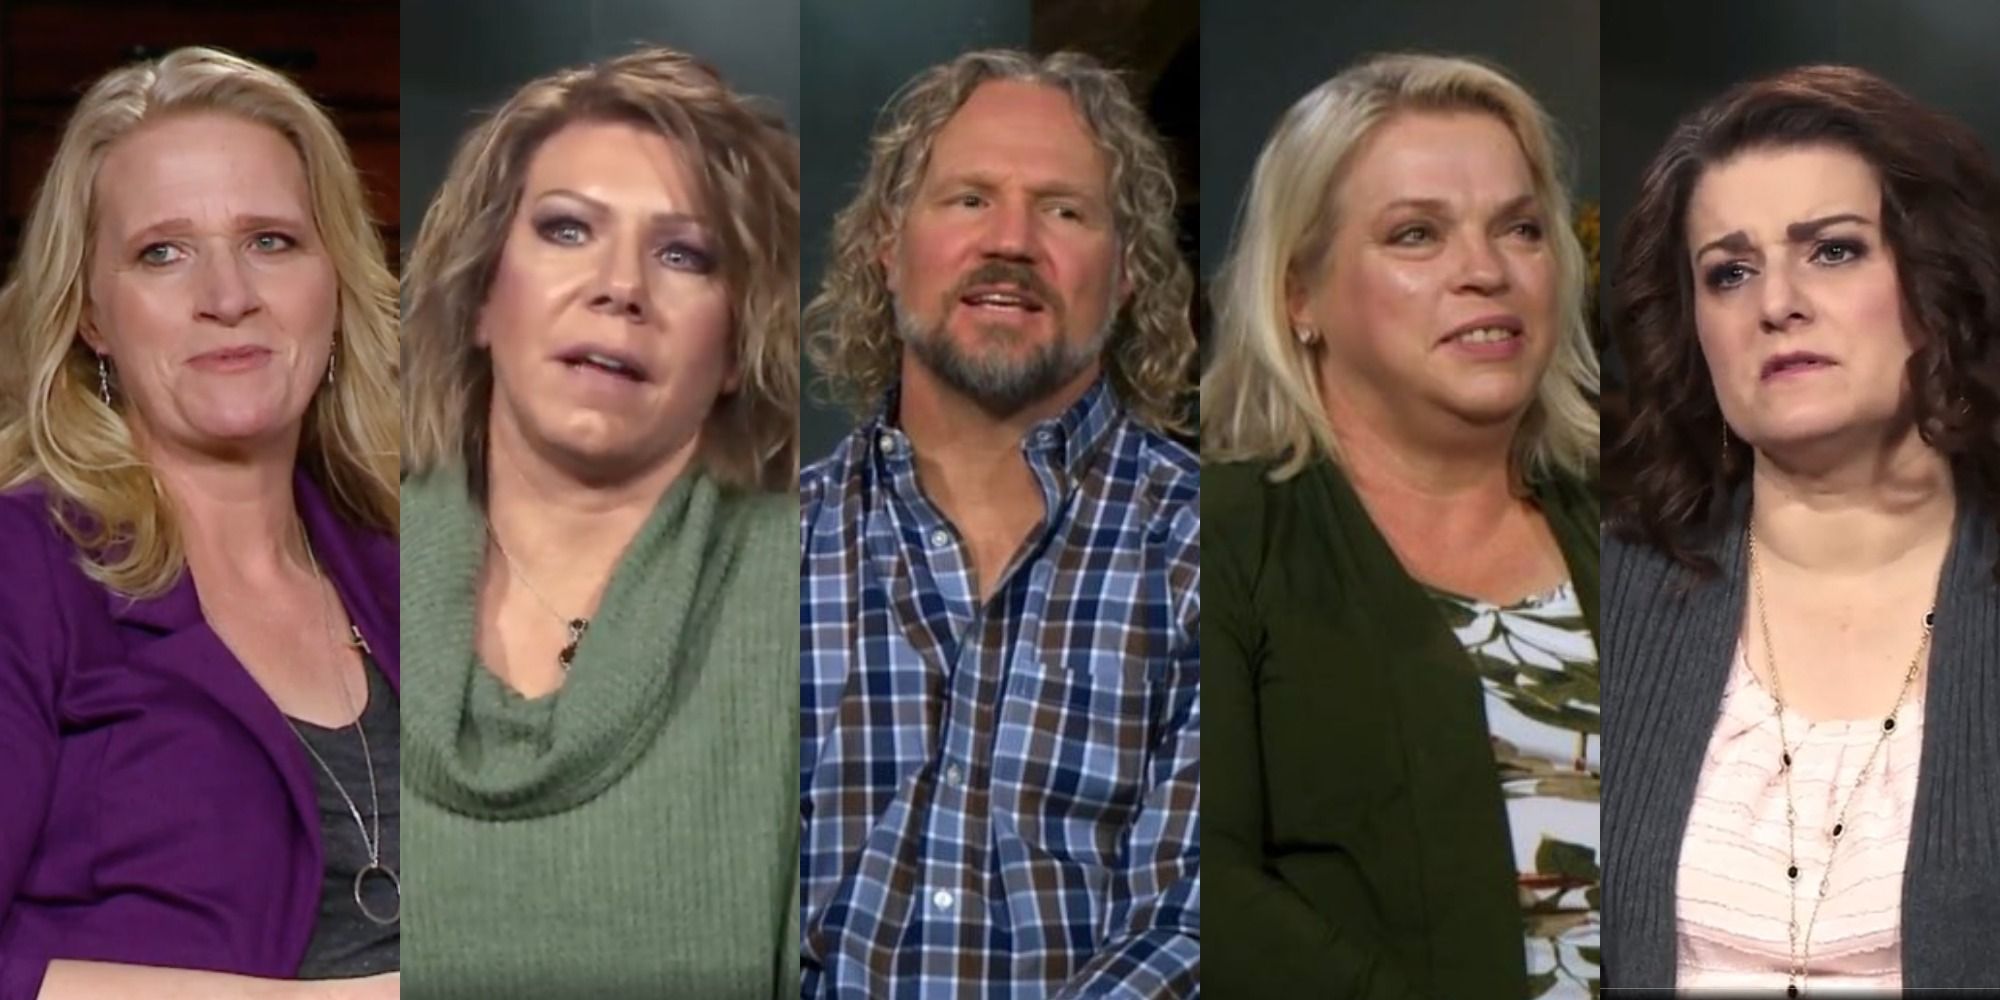 Side by side images of Kody Brown and his wives from Sister Wives